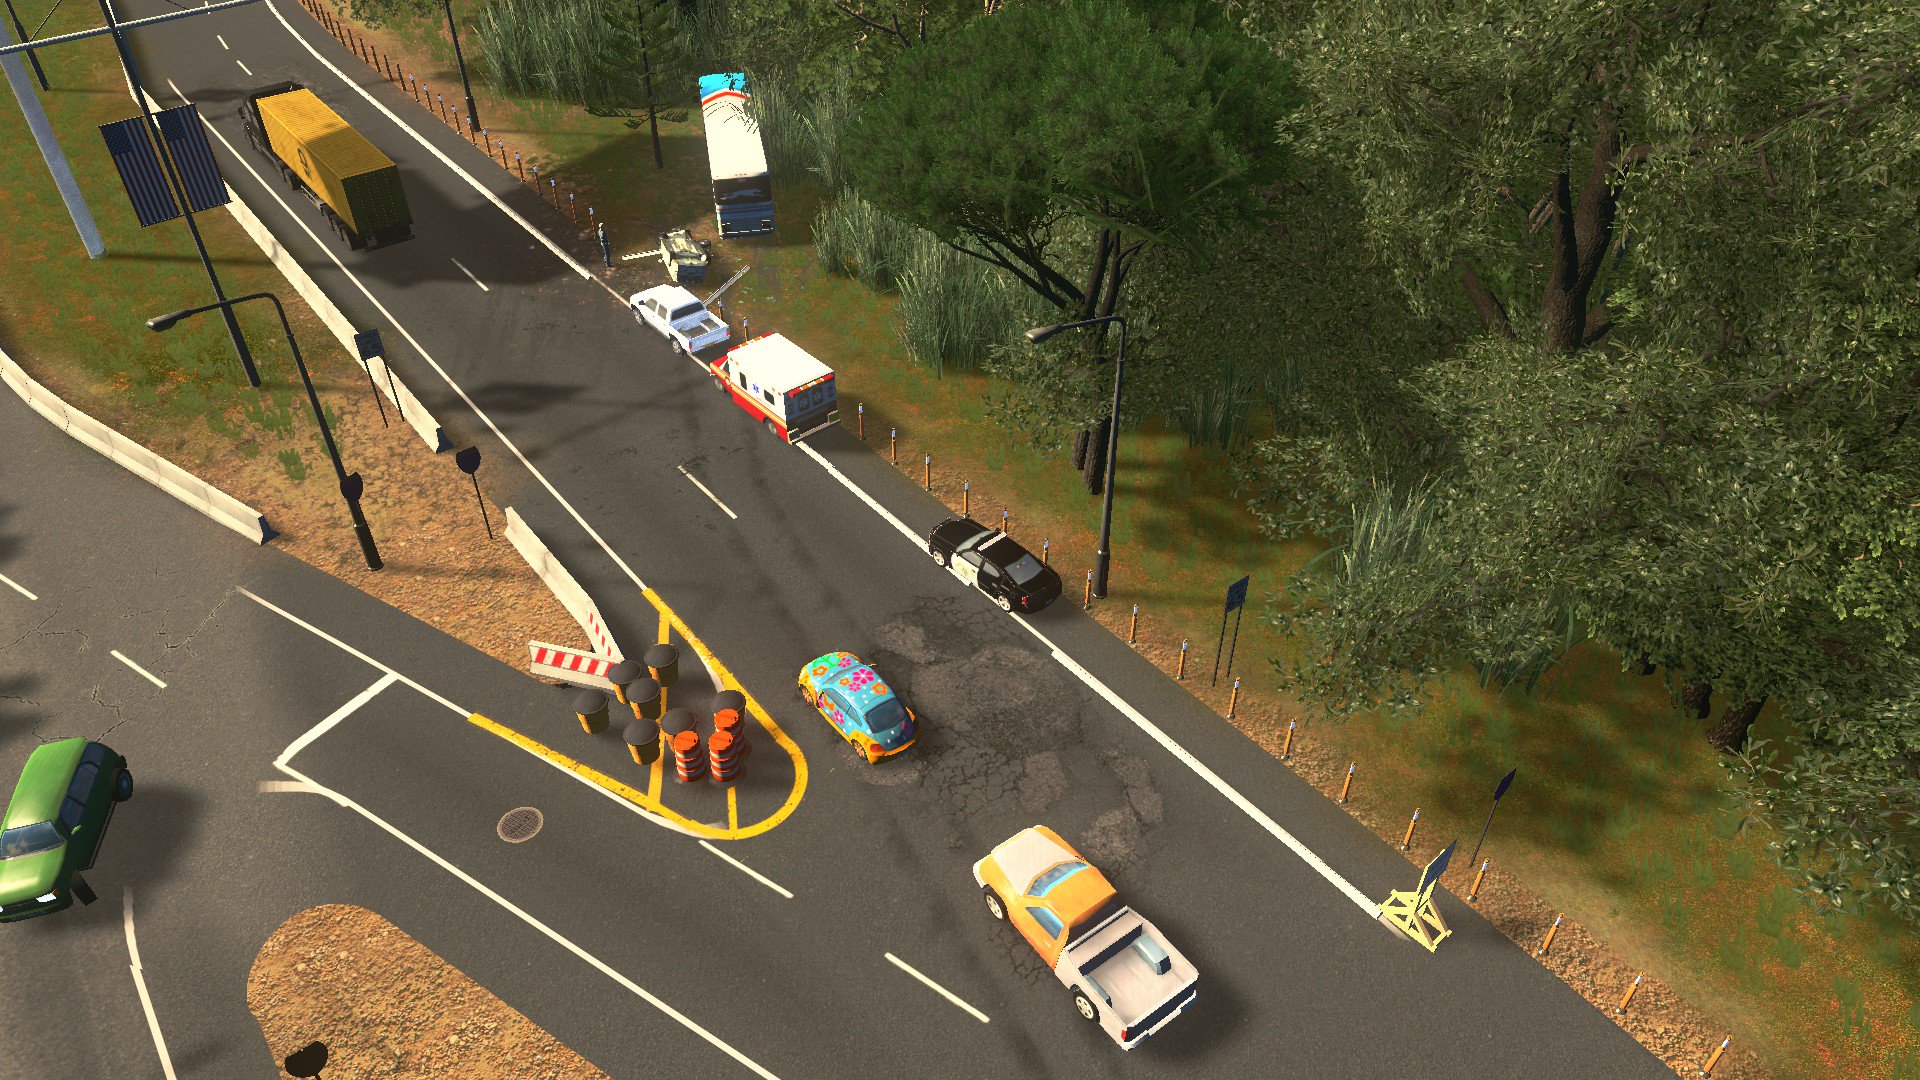 Cities Skylines For Today S Brainstorm If Car Accidents Were A Thing In Cities Skylines Would That Be A Fun Addition To The Game Or A Frustration That Would Aggravate